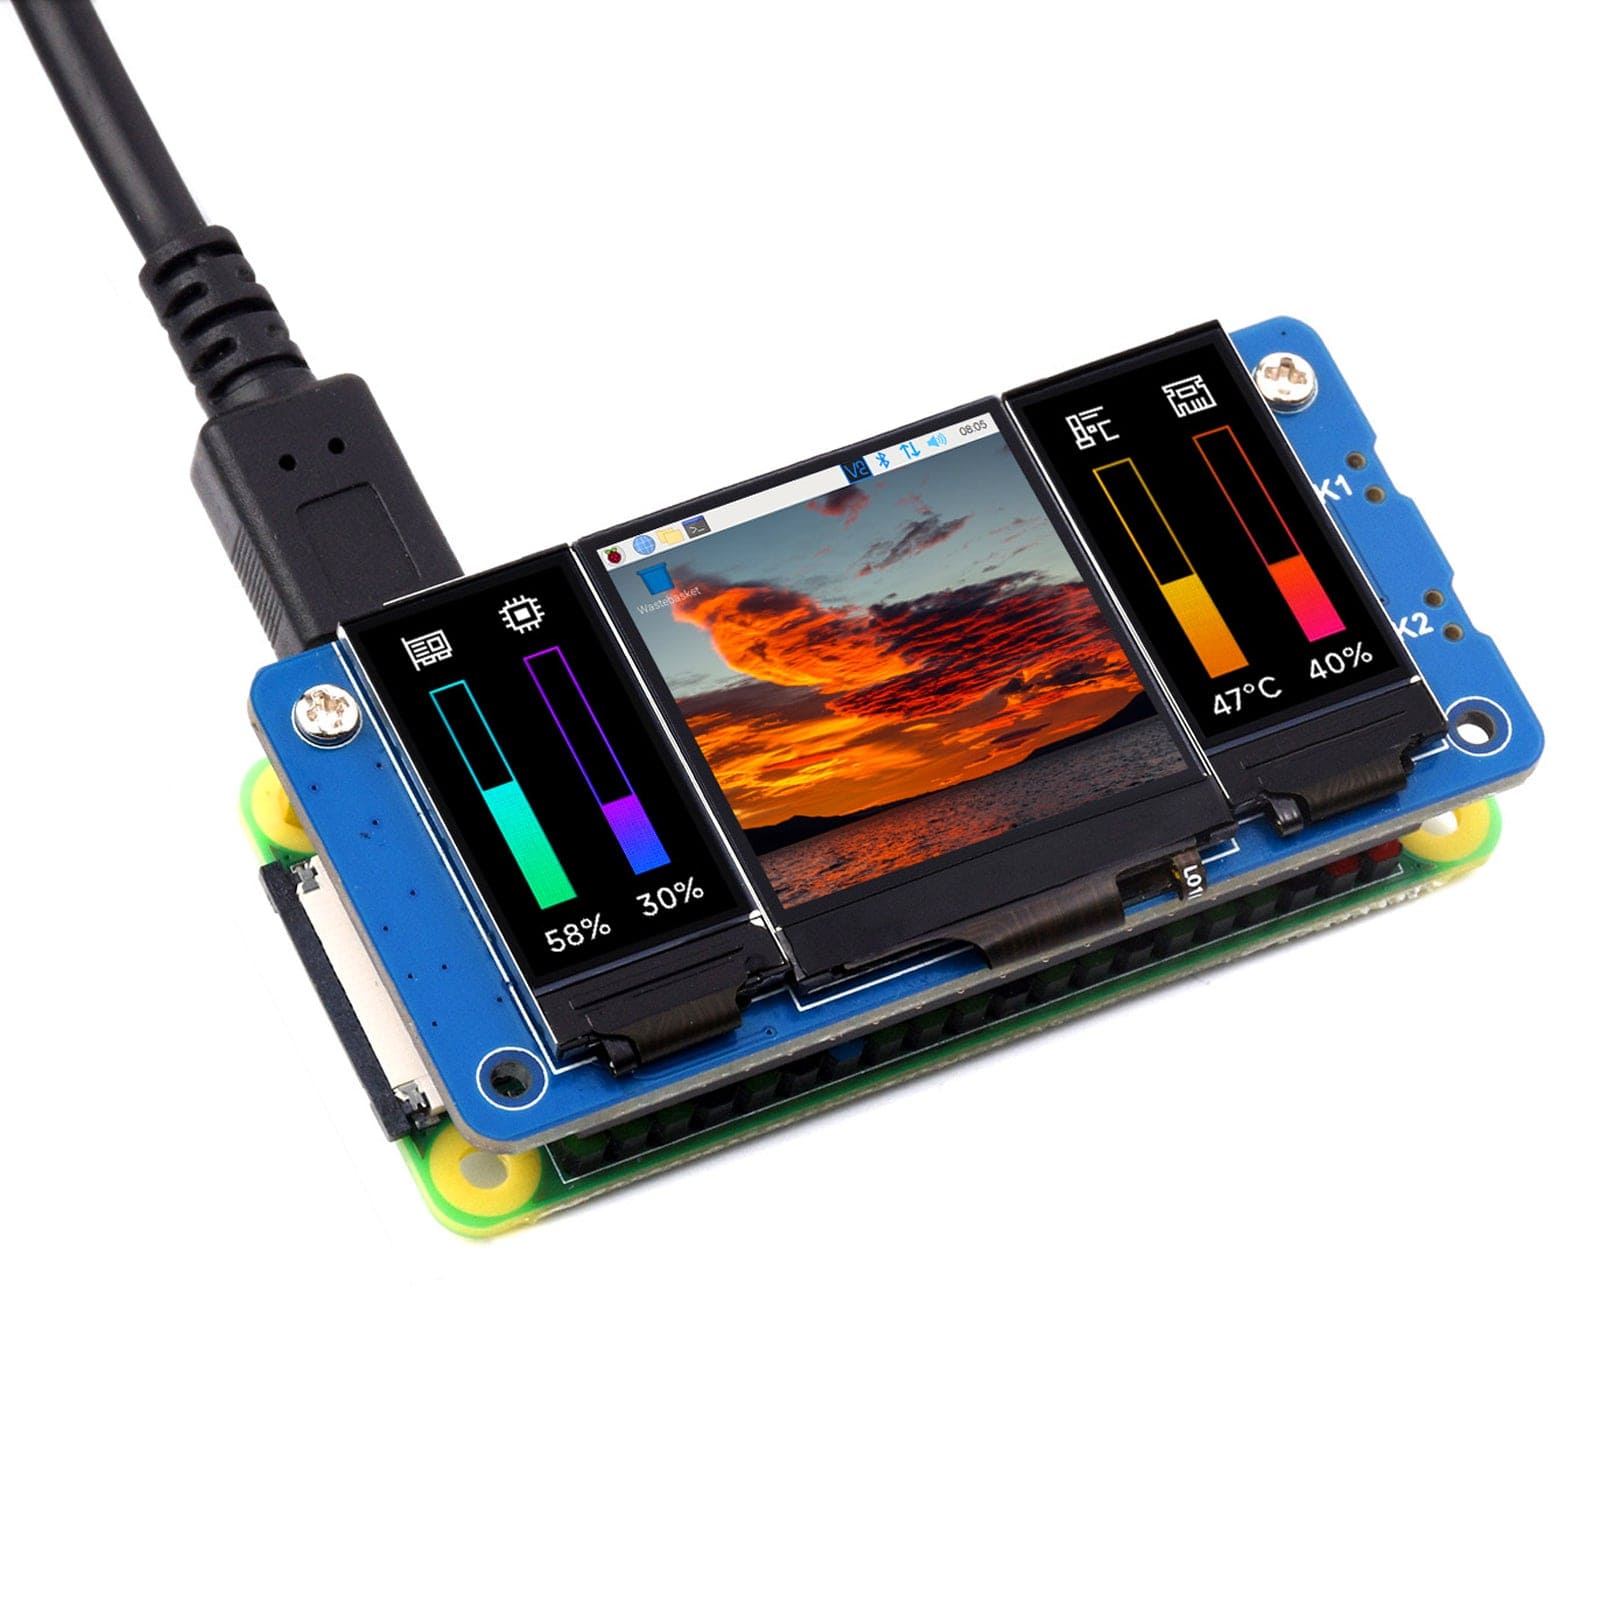 Triple IPS LCD HAT for Raspberry Pi - The Pi Hut